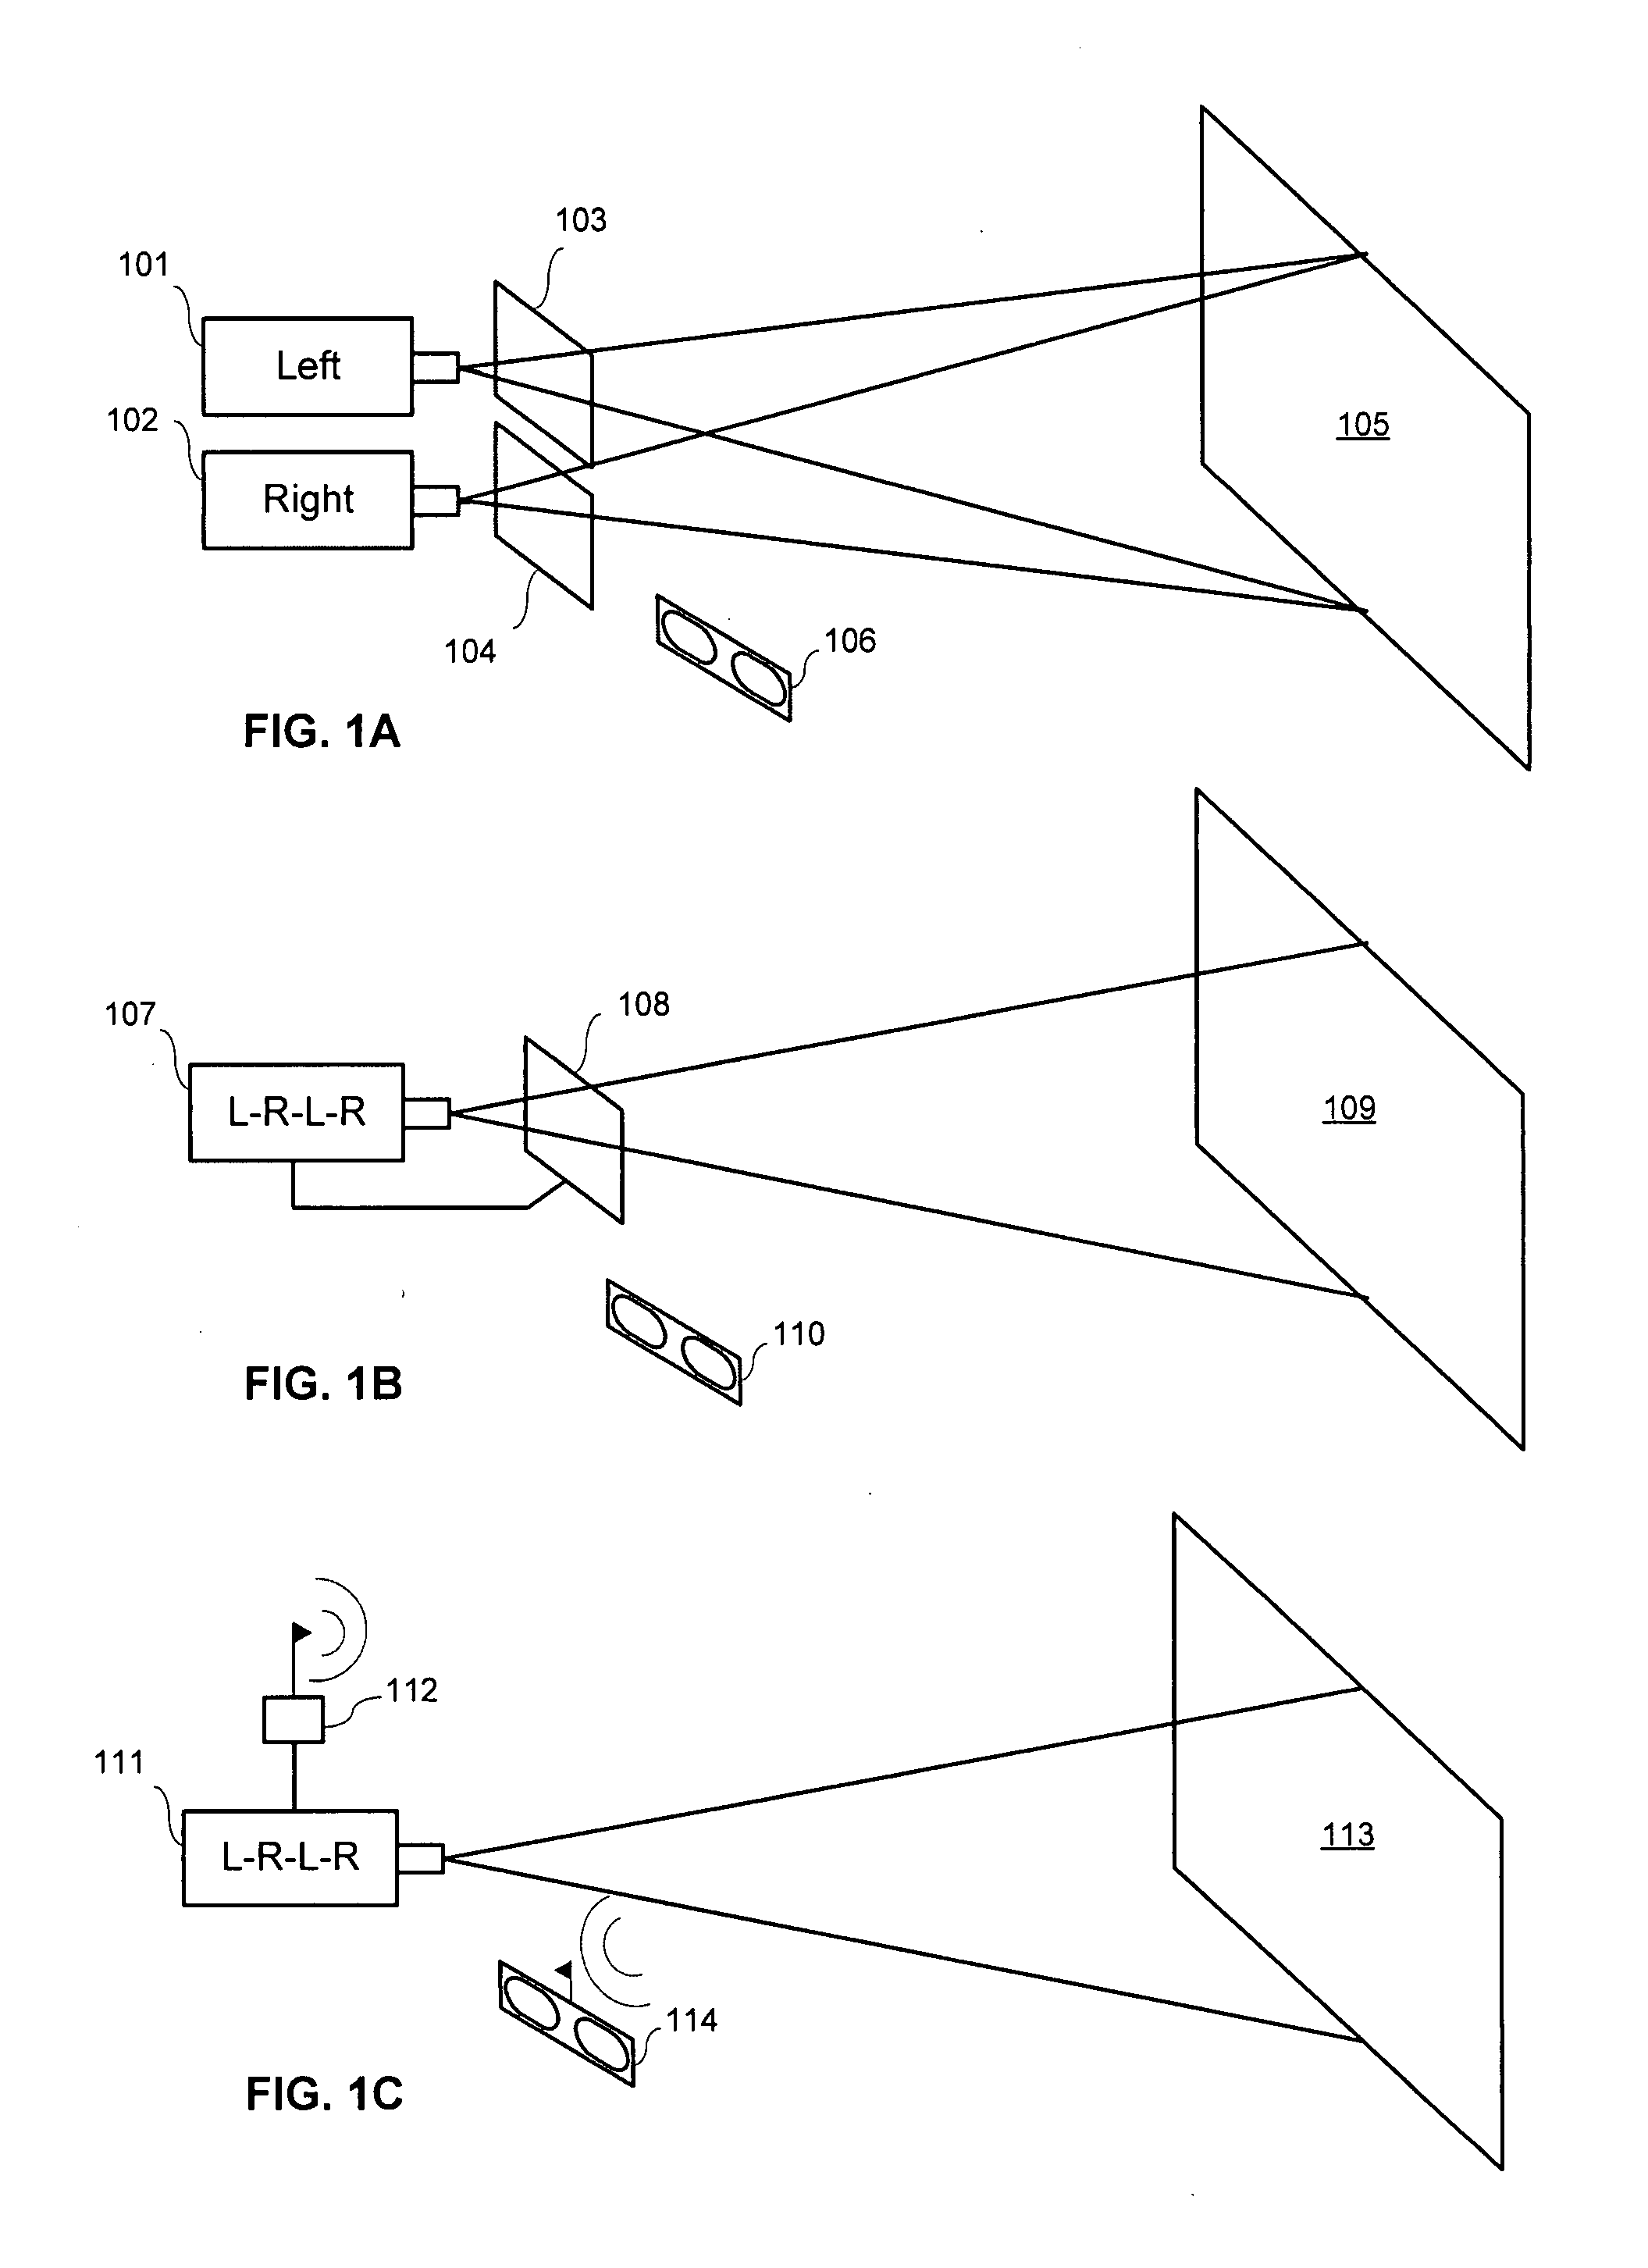 Projection of stereoscopic images using linearly polarized light